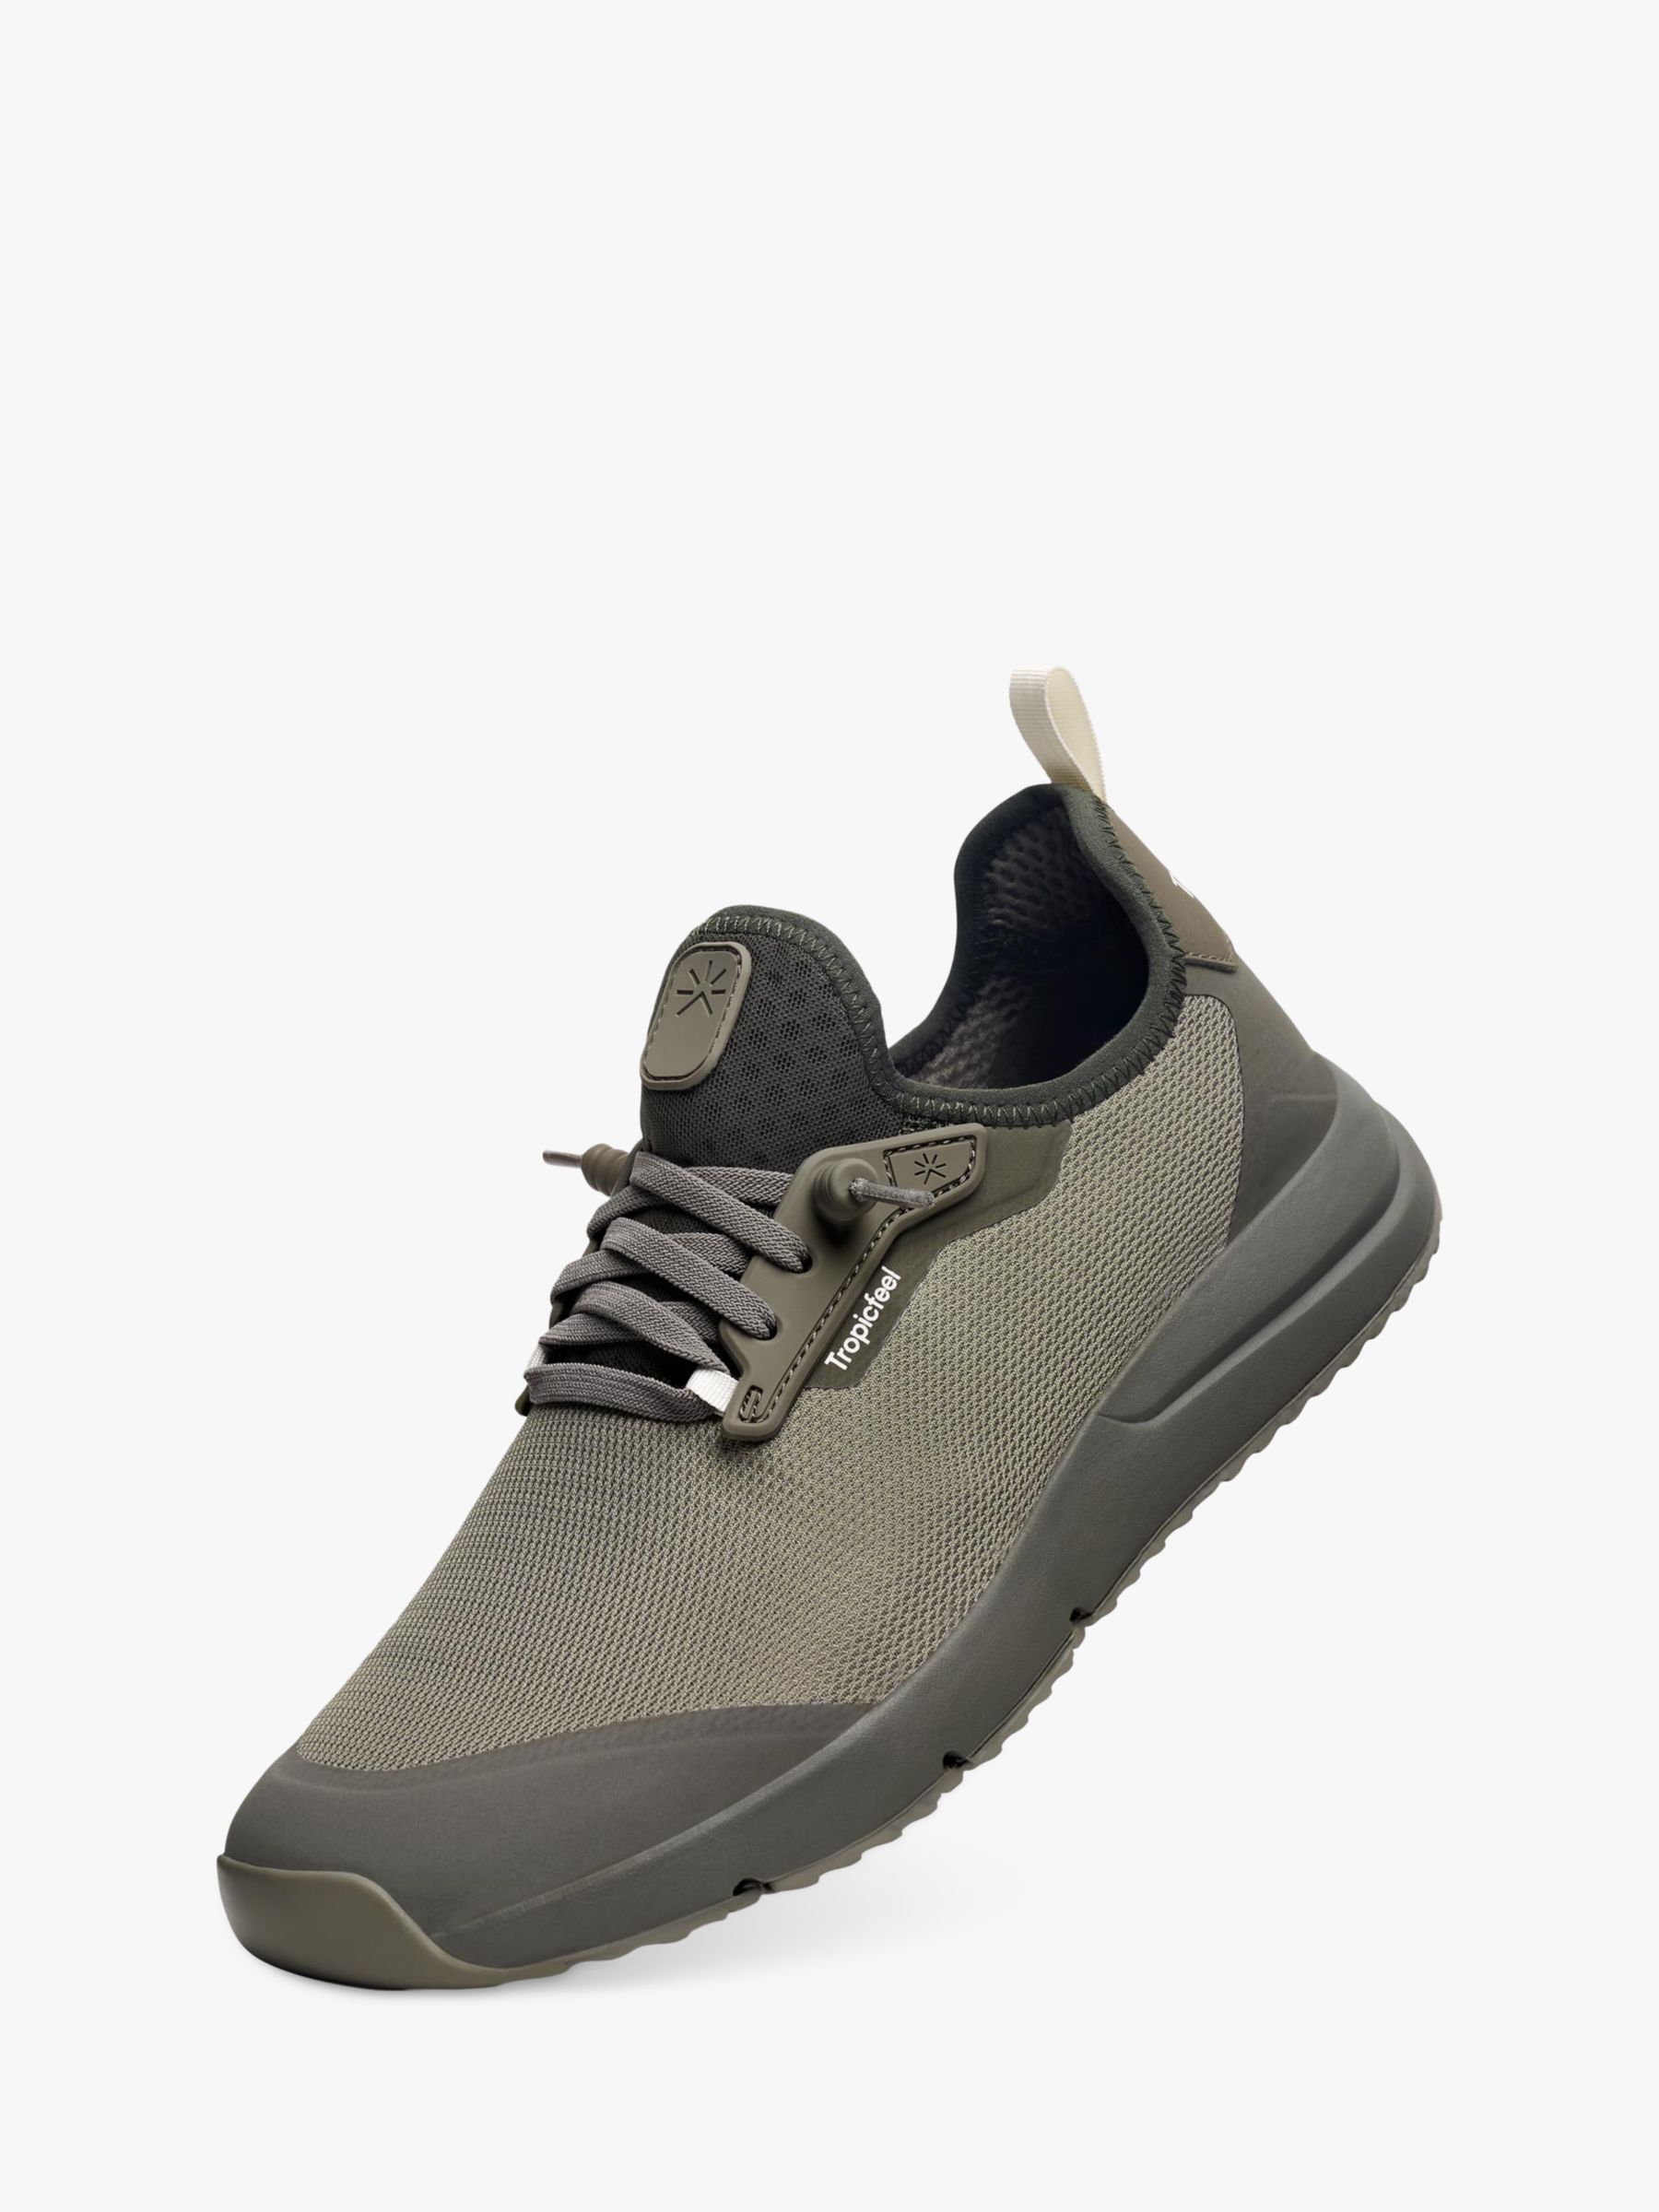 Buy Tropicfeel All-Terrain Lite Recycled Trainers Online at johnlewis.com